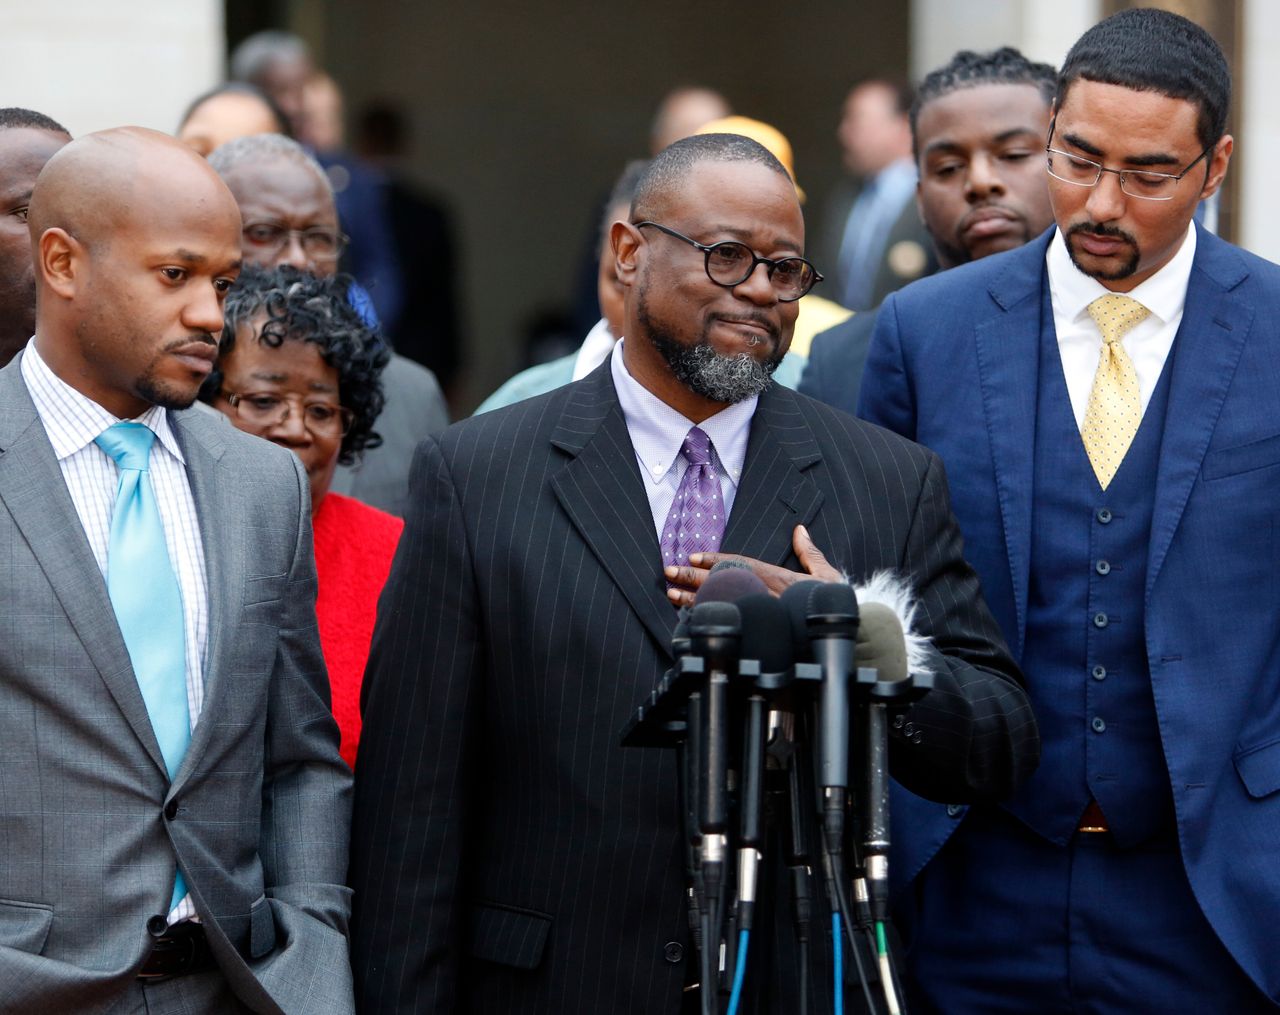 Anthony Scott, Walter Scott's brother, speaks during a press conference in front of the Charleston County Courthouse after a mistrial was declared in the trial of former patrolman Michael Slager, who was charged with murder.